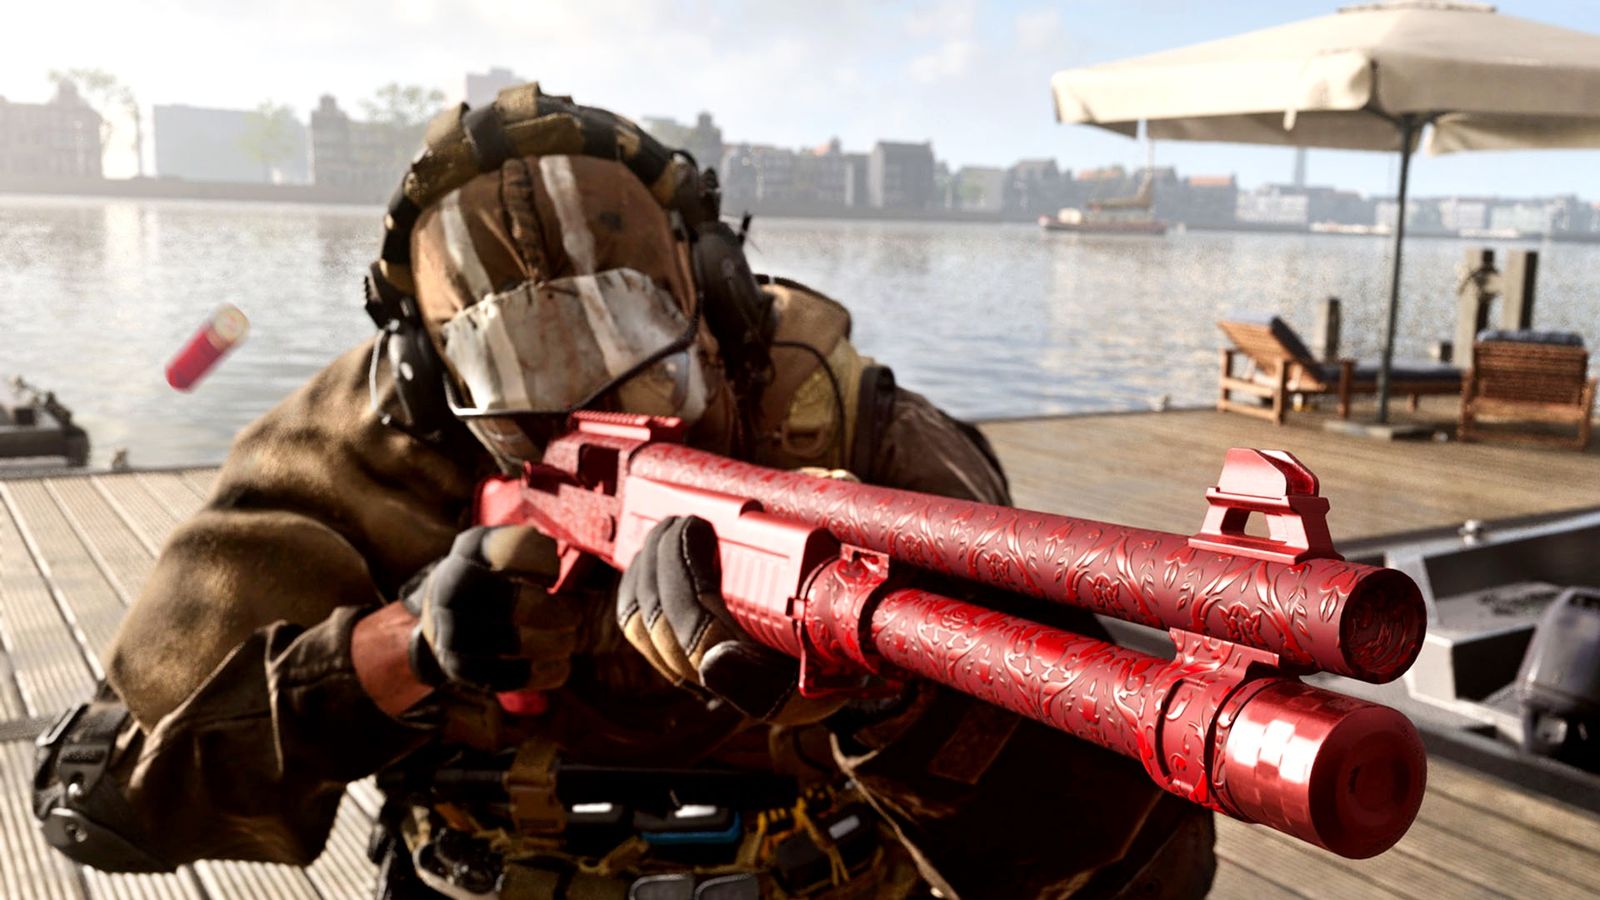 Warzone player aiming down sights of red double-barreled shotgun